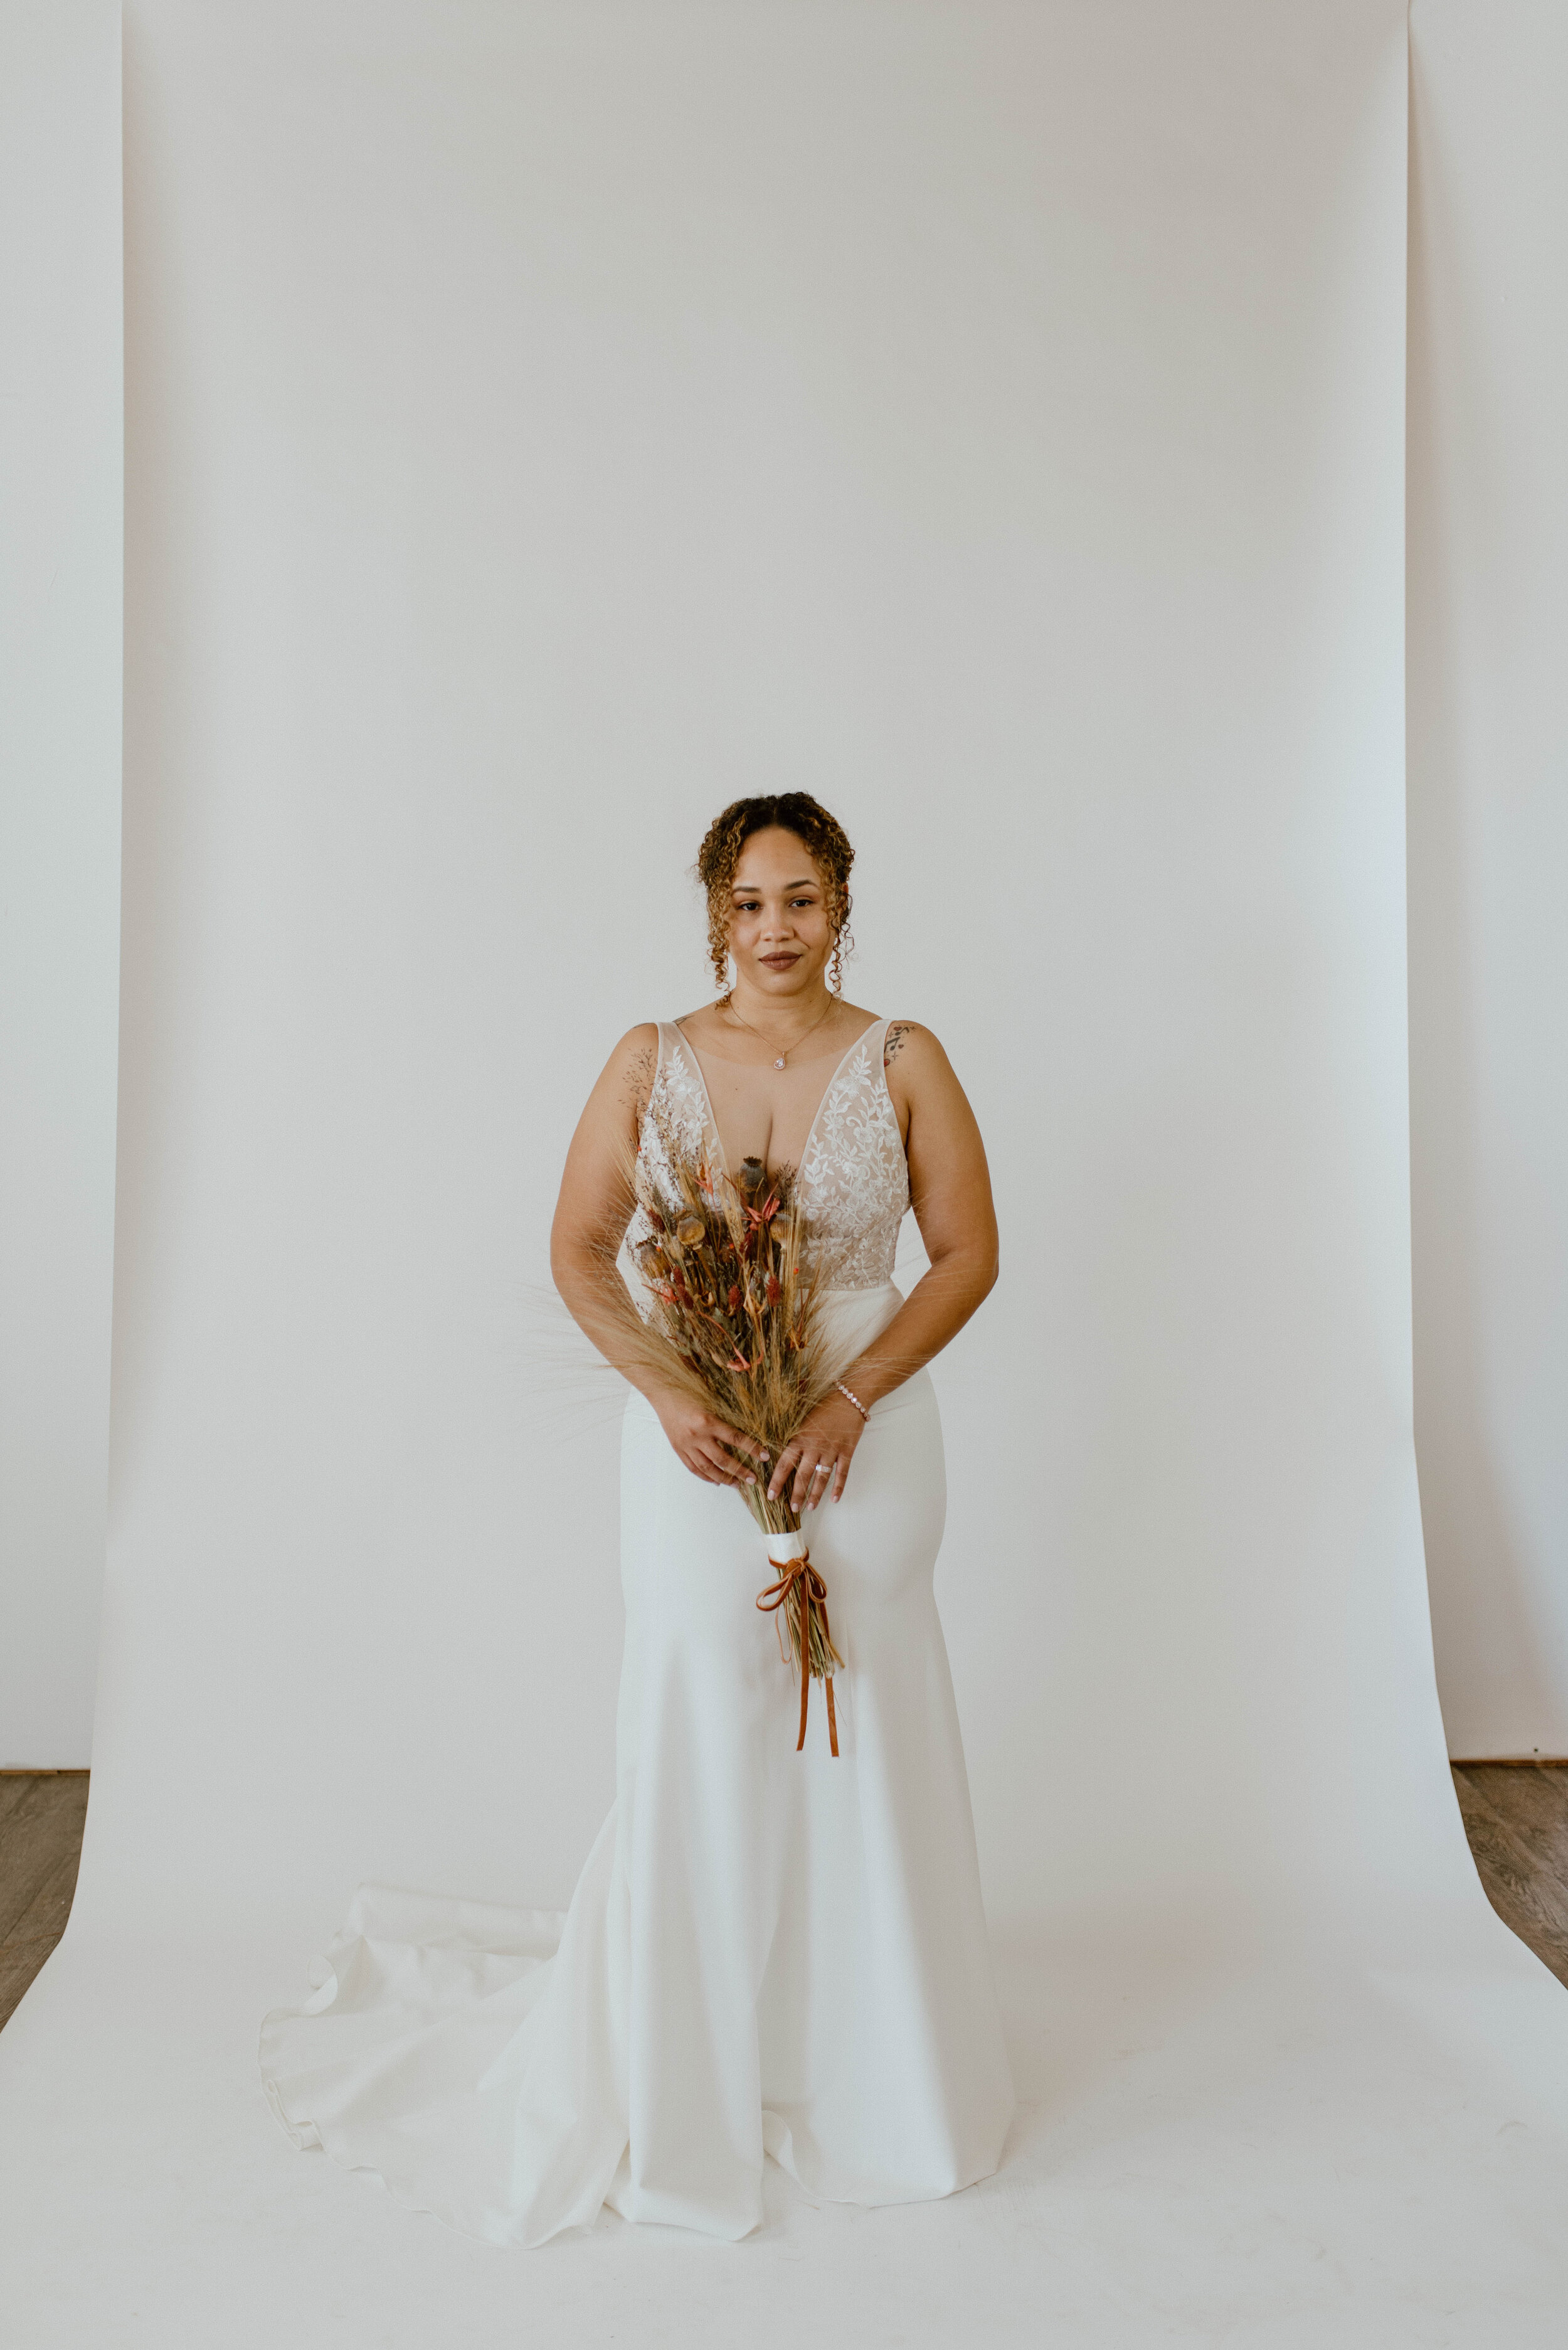  Arthouse Sacramento styled wedding shoot in Jenny Yoo Marnie, Callahan, and Harlow wedding dresses photographed by Eden B. Photography 